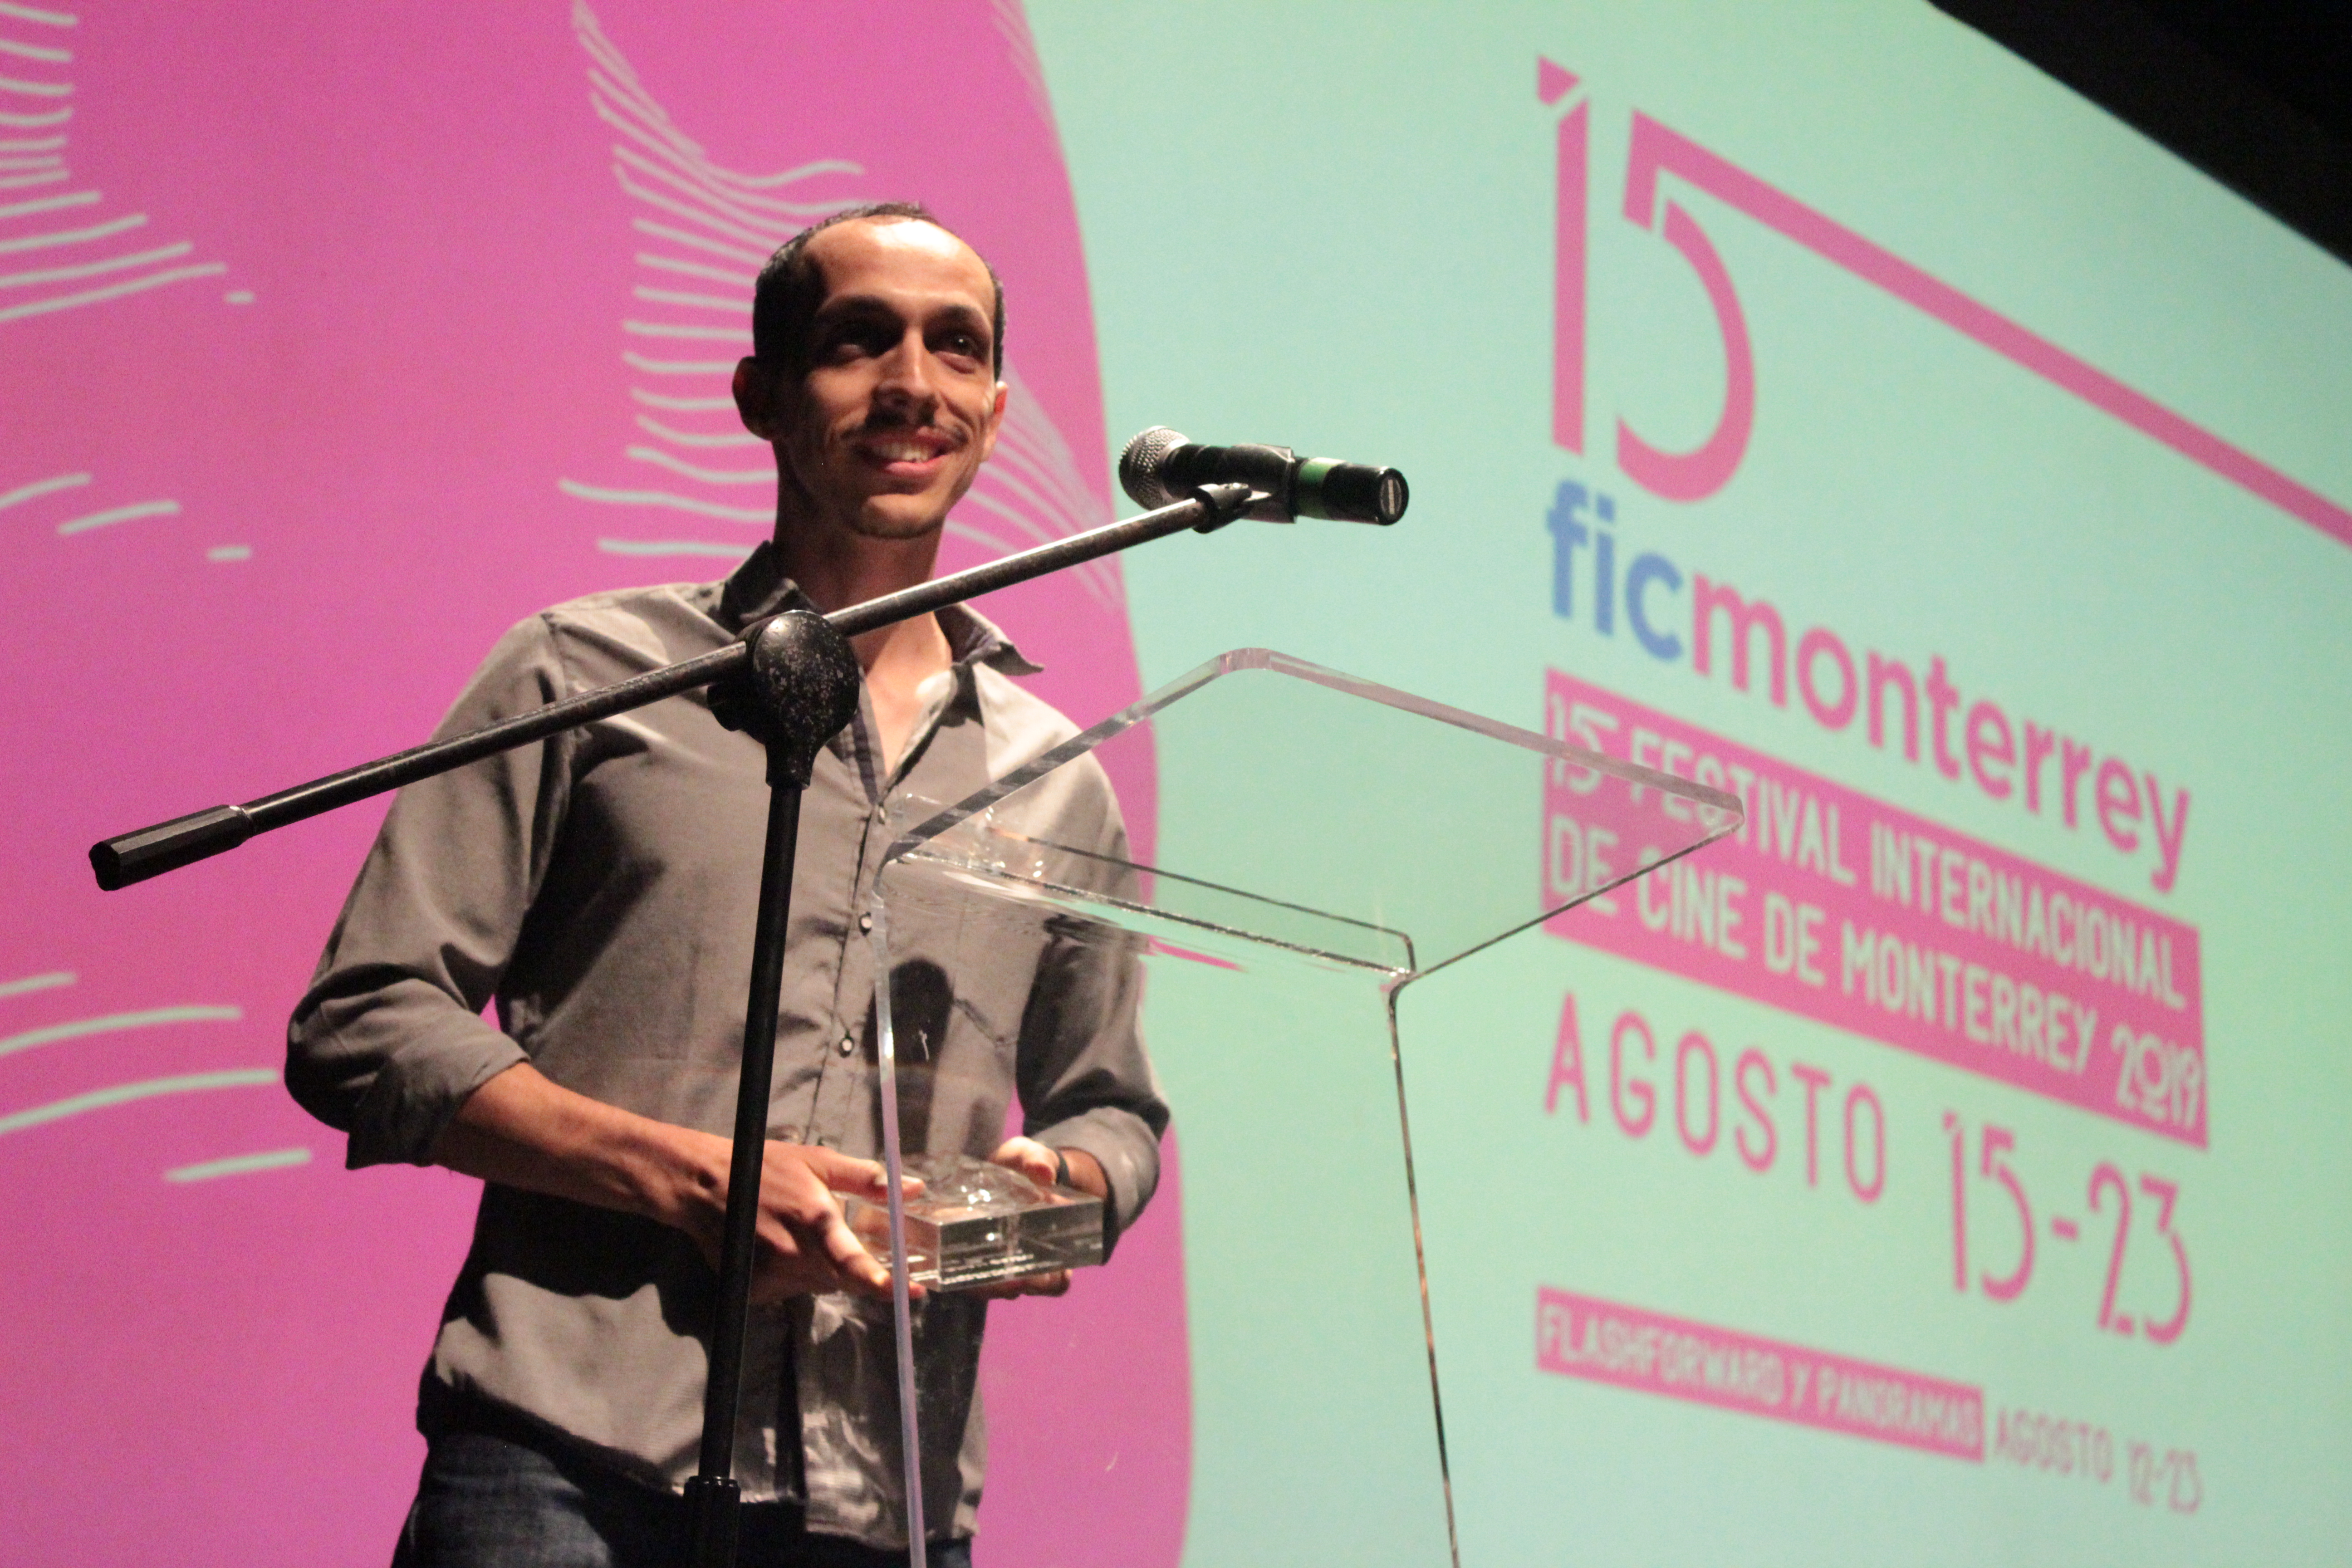 Winners of the FIC MTY 2019 were revealed.